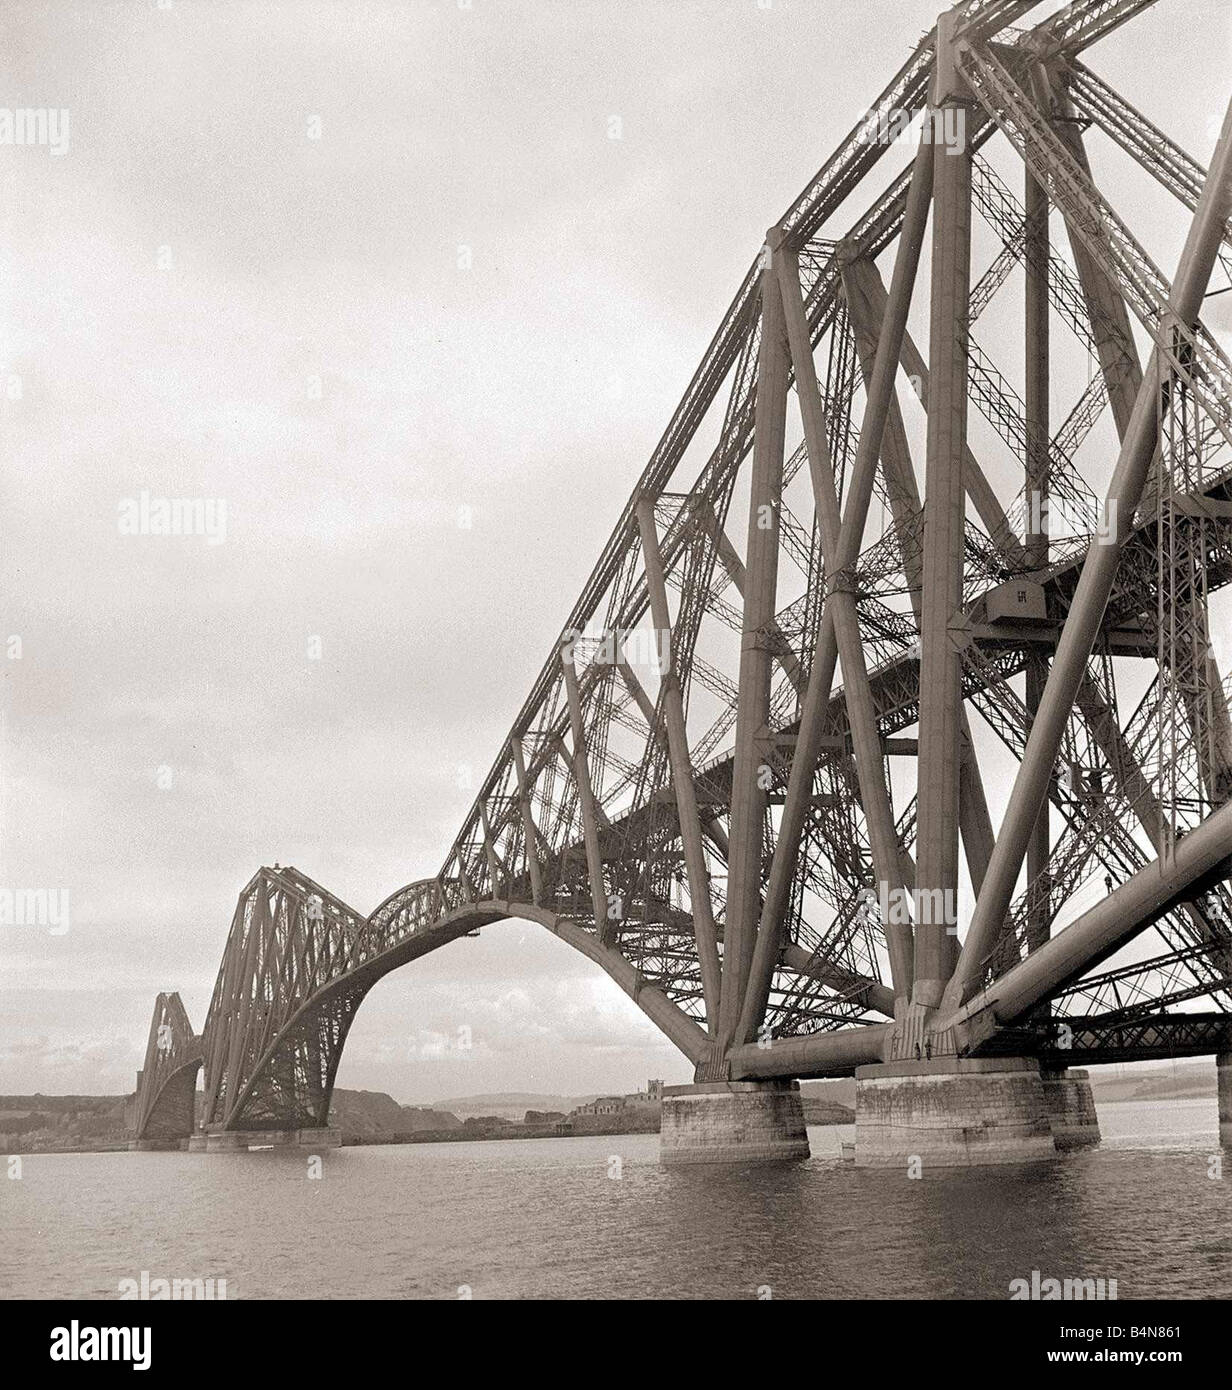 The Forth Rail Bridge The Forth Bridge The Forth Bridge Built 1890 was the largest span bridge in the world The bridge took seven years to build cost 3 million at the time and used over 50 000 tons of steel It was the largest civil engineering structure achieved during the nineteenth century and although William Morris described it as the supremest specimen of all ugliness it remains one of the industrial wonders of the world Bridge Cantiliver Engineering Structures Girders AfairScenes March 4 1890 Anniversary Prince of Wales opens the 1 710 foot Forth Bridge in Scotland Stock Photo